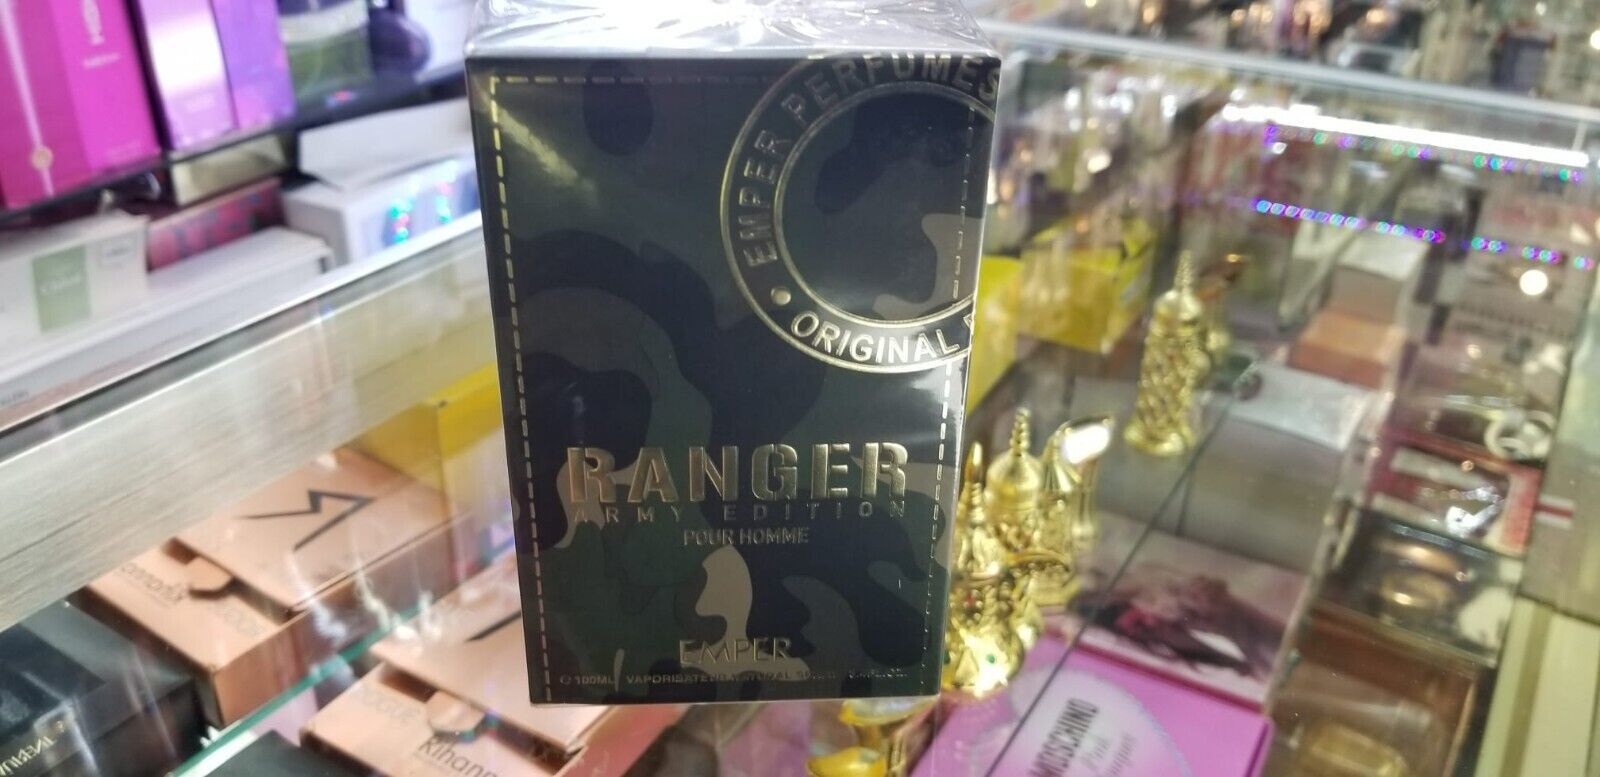 Ranger Army Edition Pour Homme by Emper 3.4 oz 100 ml for Men Him NEW & SEALED - $42.99